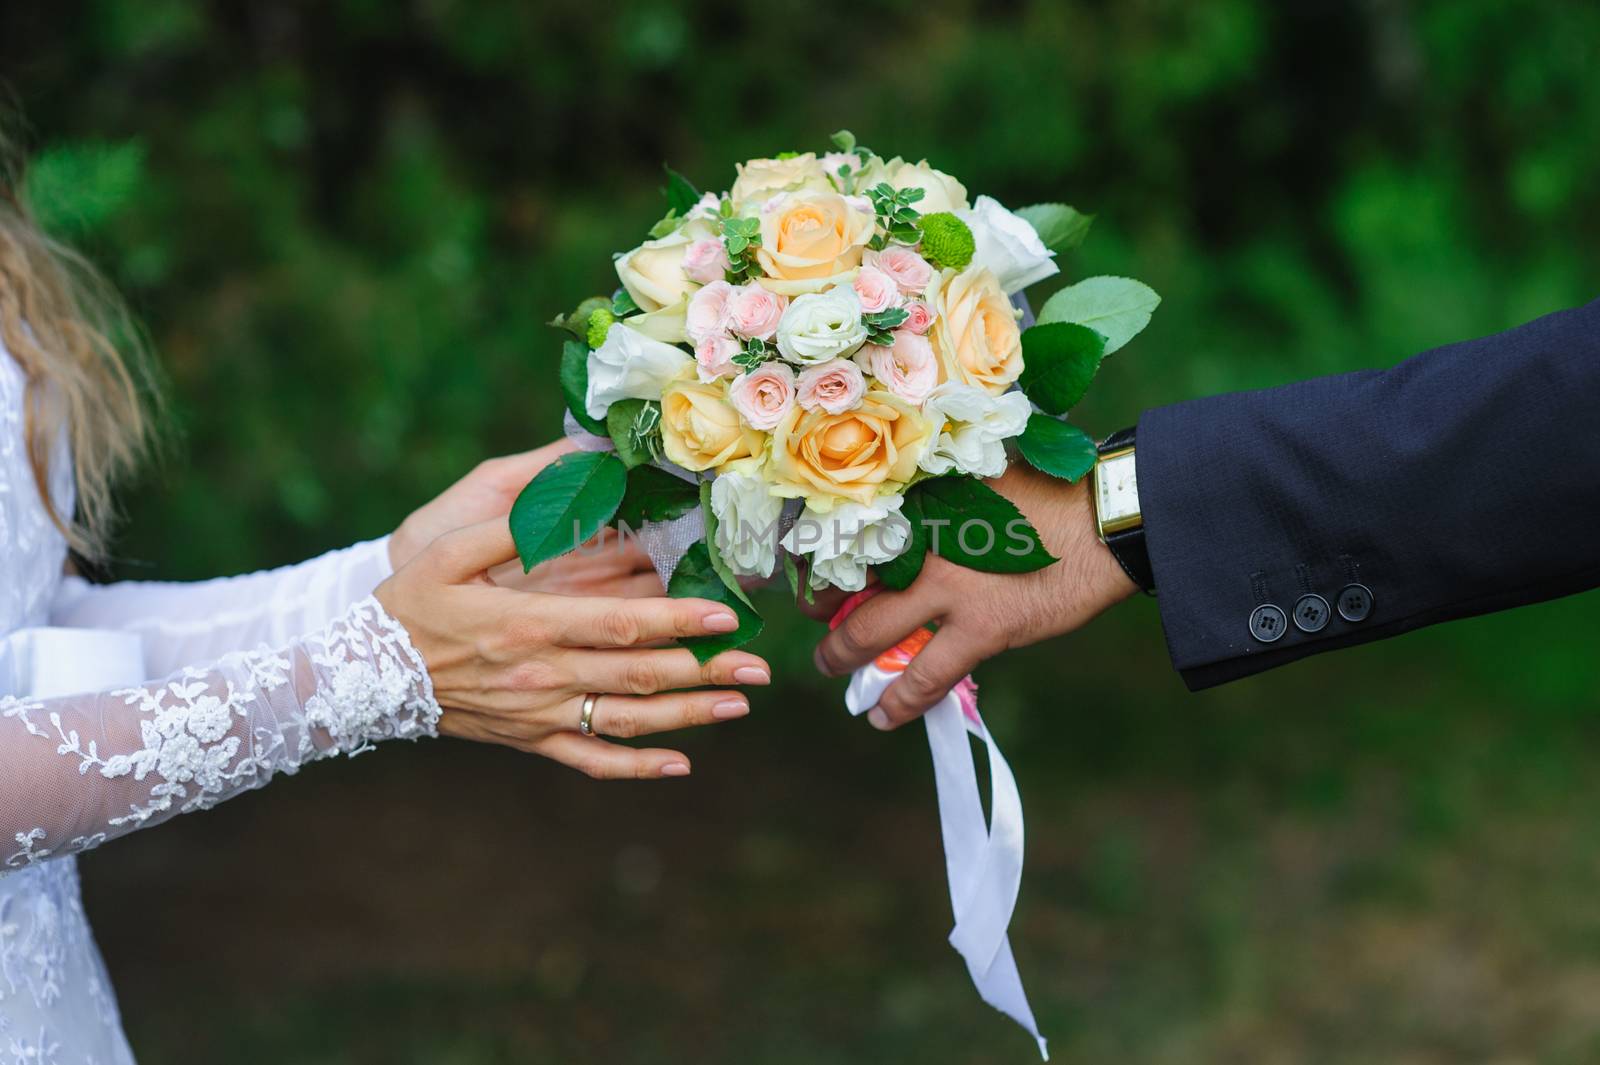 Groom gives bride a wedding bouquet in summer park.